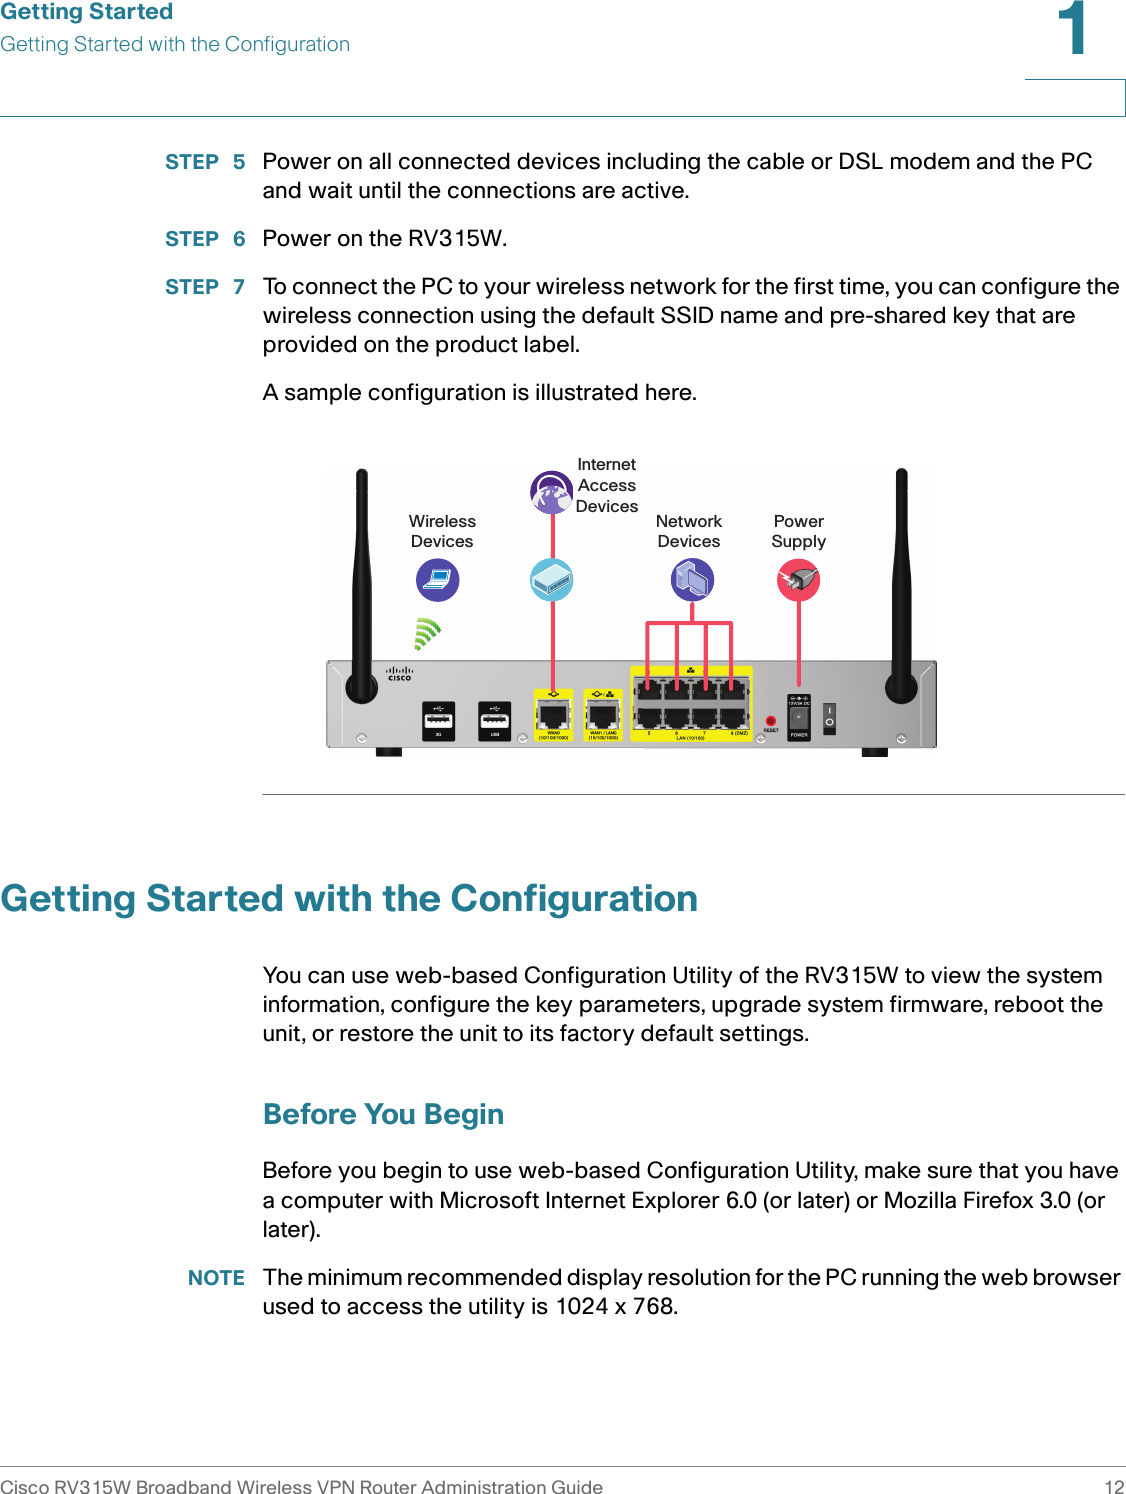 Getting StartedGetting Started with the ConfigurationCisco RV315W Broadband Wireless VPN Router Administration Guide 121STEP  5 Power on all connected devices including the cable or DSL modem and the PC and wait until the connections are active. STEP  6 Power on the RV315W. STEP  7 To connect the PC to your wireless network for the first time, you can configure the wireless connection using the default SSID name and pre-shared key that are provided on the product label. A sample configuration is illustrated here. Getting Started with the ConfigurationYou can use web-based Configuration Utility of the RV315W to view the system information, configure the key parameters, upgrade system firmware, reboot the unit, or restore the unit to its factory default settings. Before You BeginBefore you begin to use web-based Configuration Utility, make sure that you have a computer with Microsoft Internet Explorer 6.0 (or later) or Mozilla Firefox 3.0 (or later). NOTE The minimum recommended display resolution for the PC running the web browser used to access the utility is 1024 x 768.PowerSupplyInternetAccessDevices NetworkDevicesWirelessDevices